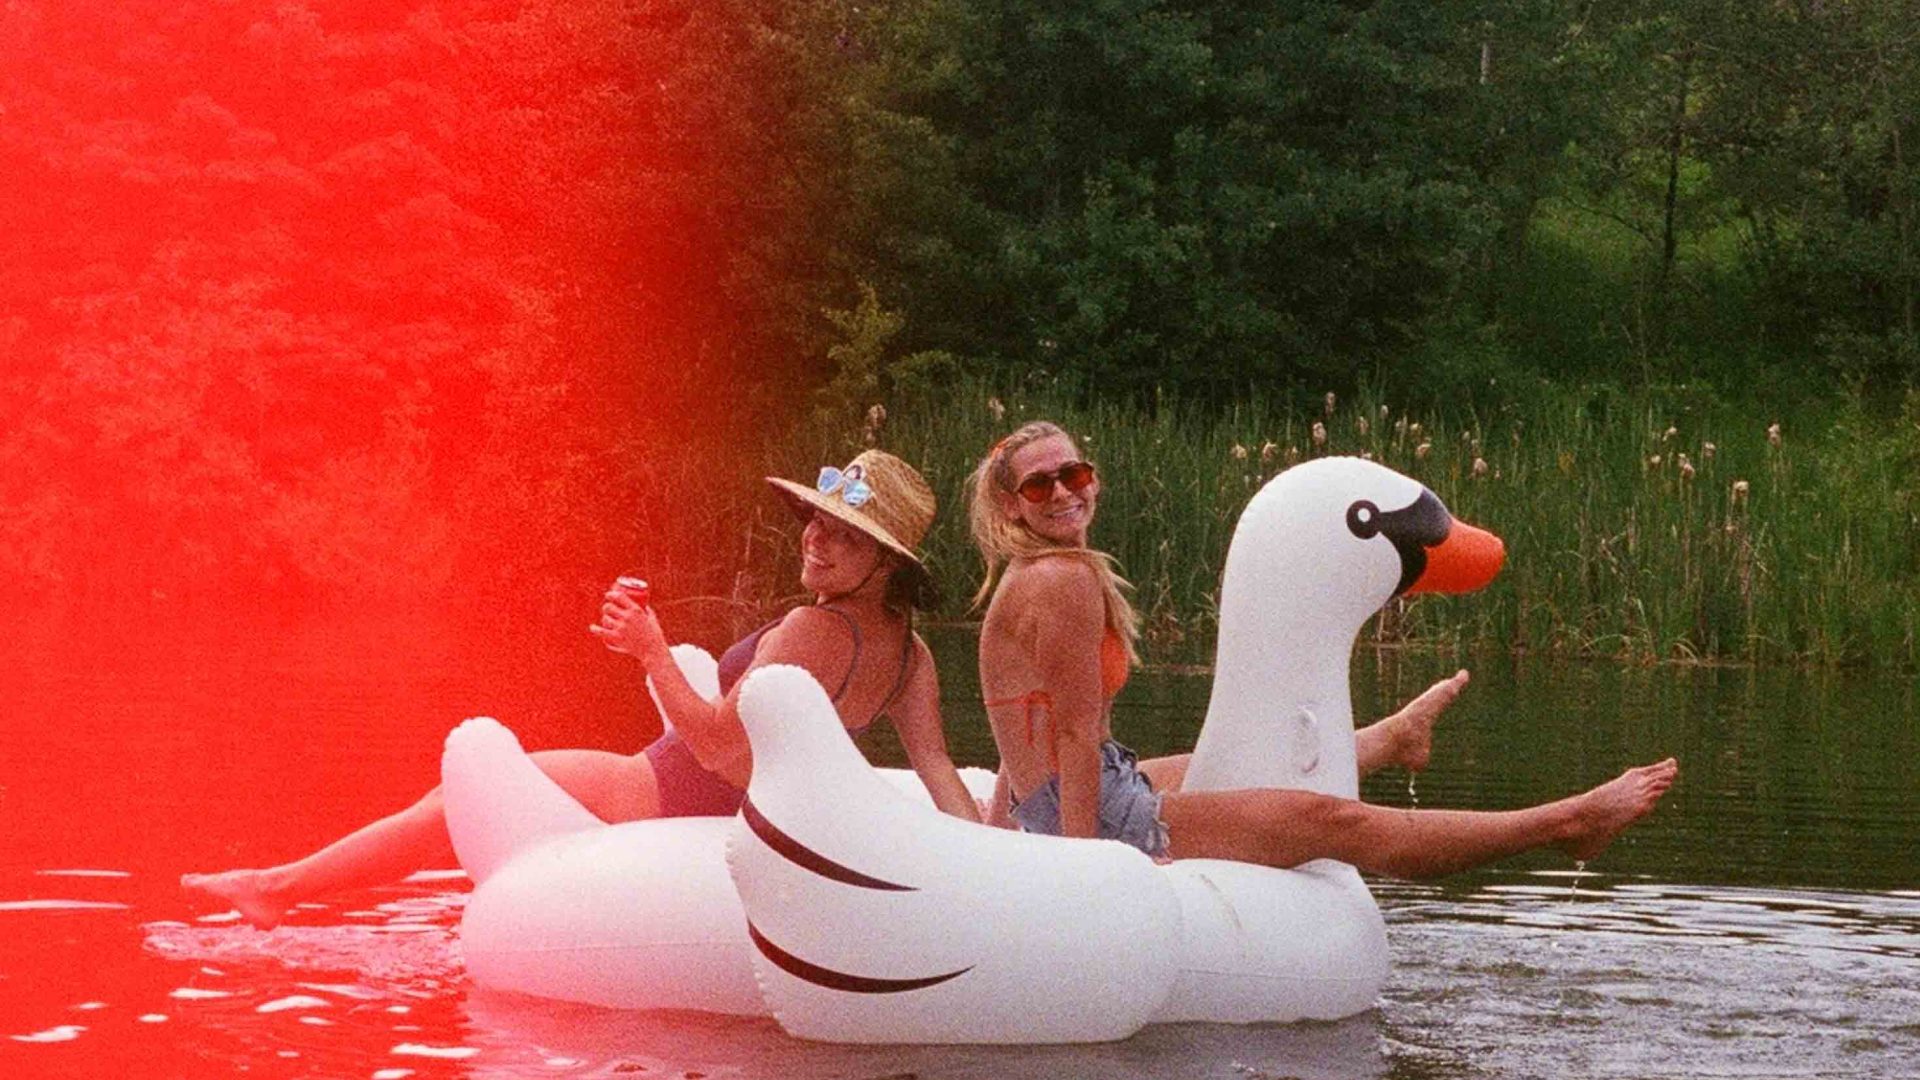 Writer Lauren Steele and a friend float around on a blow up swan.